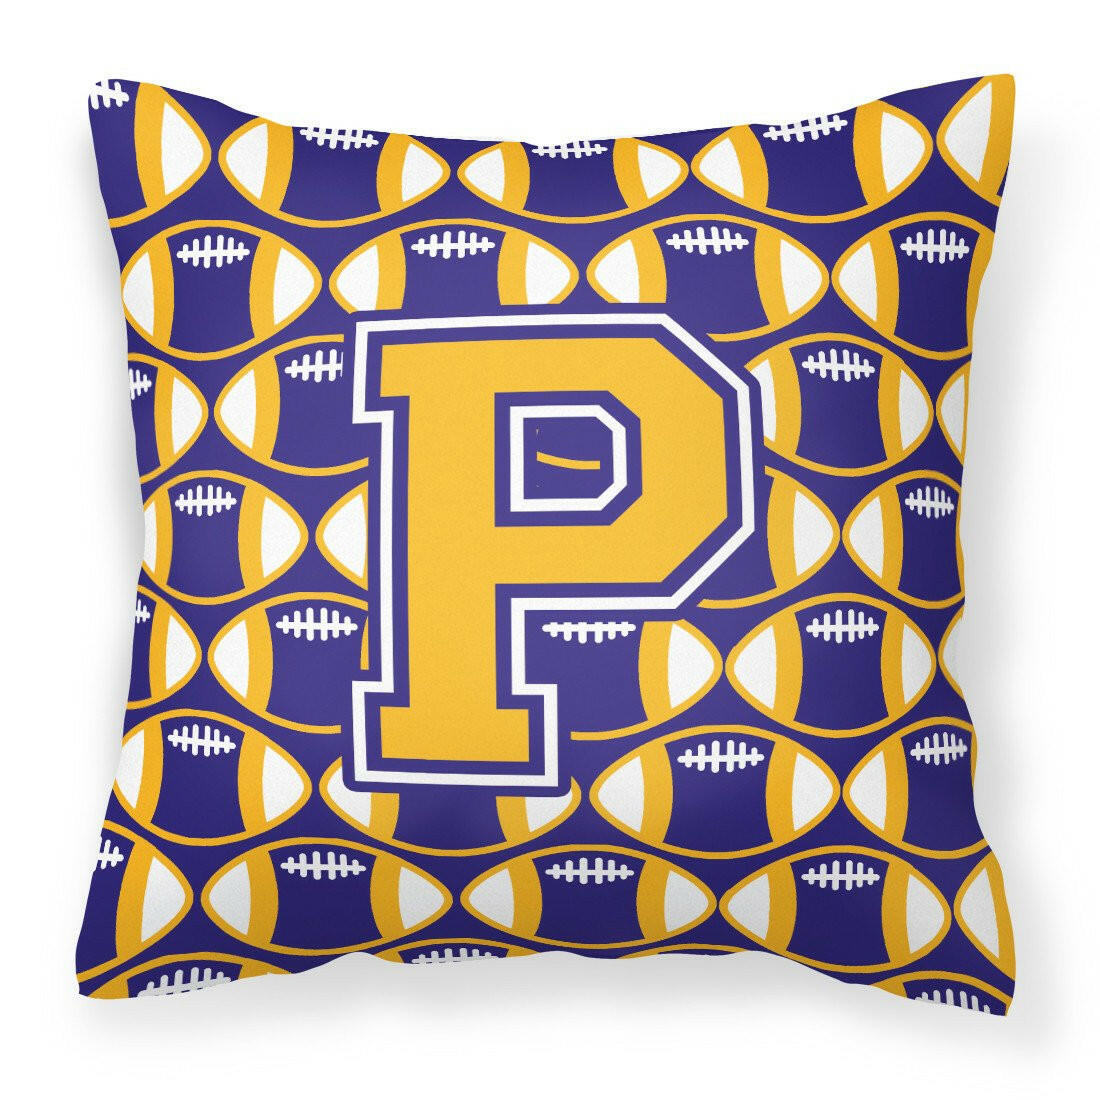 Letter P Football Purple and Gold Fabric Decorative Pillow CJ1064-PPW1414 by Caroline's Treasures